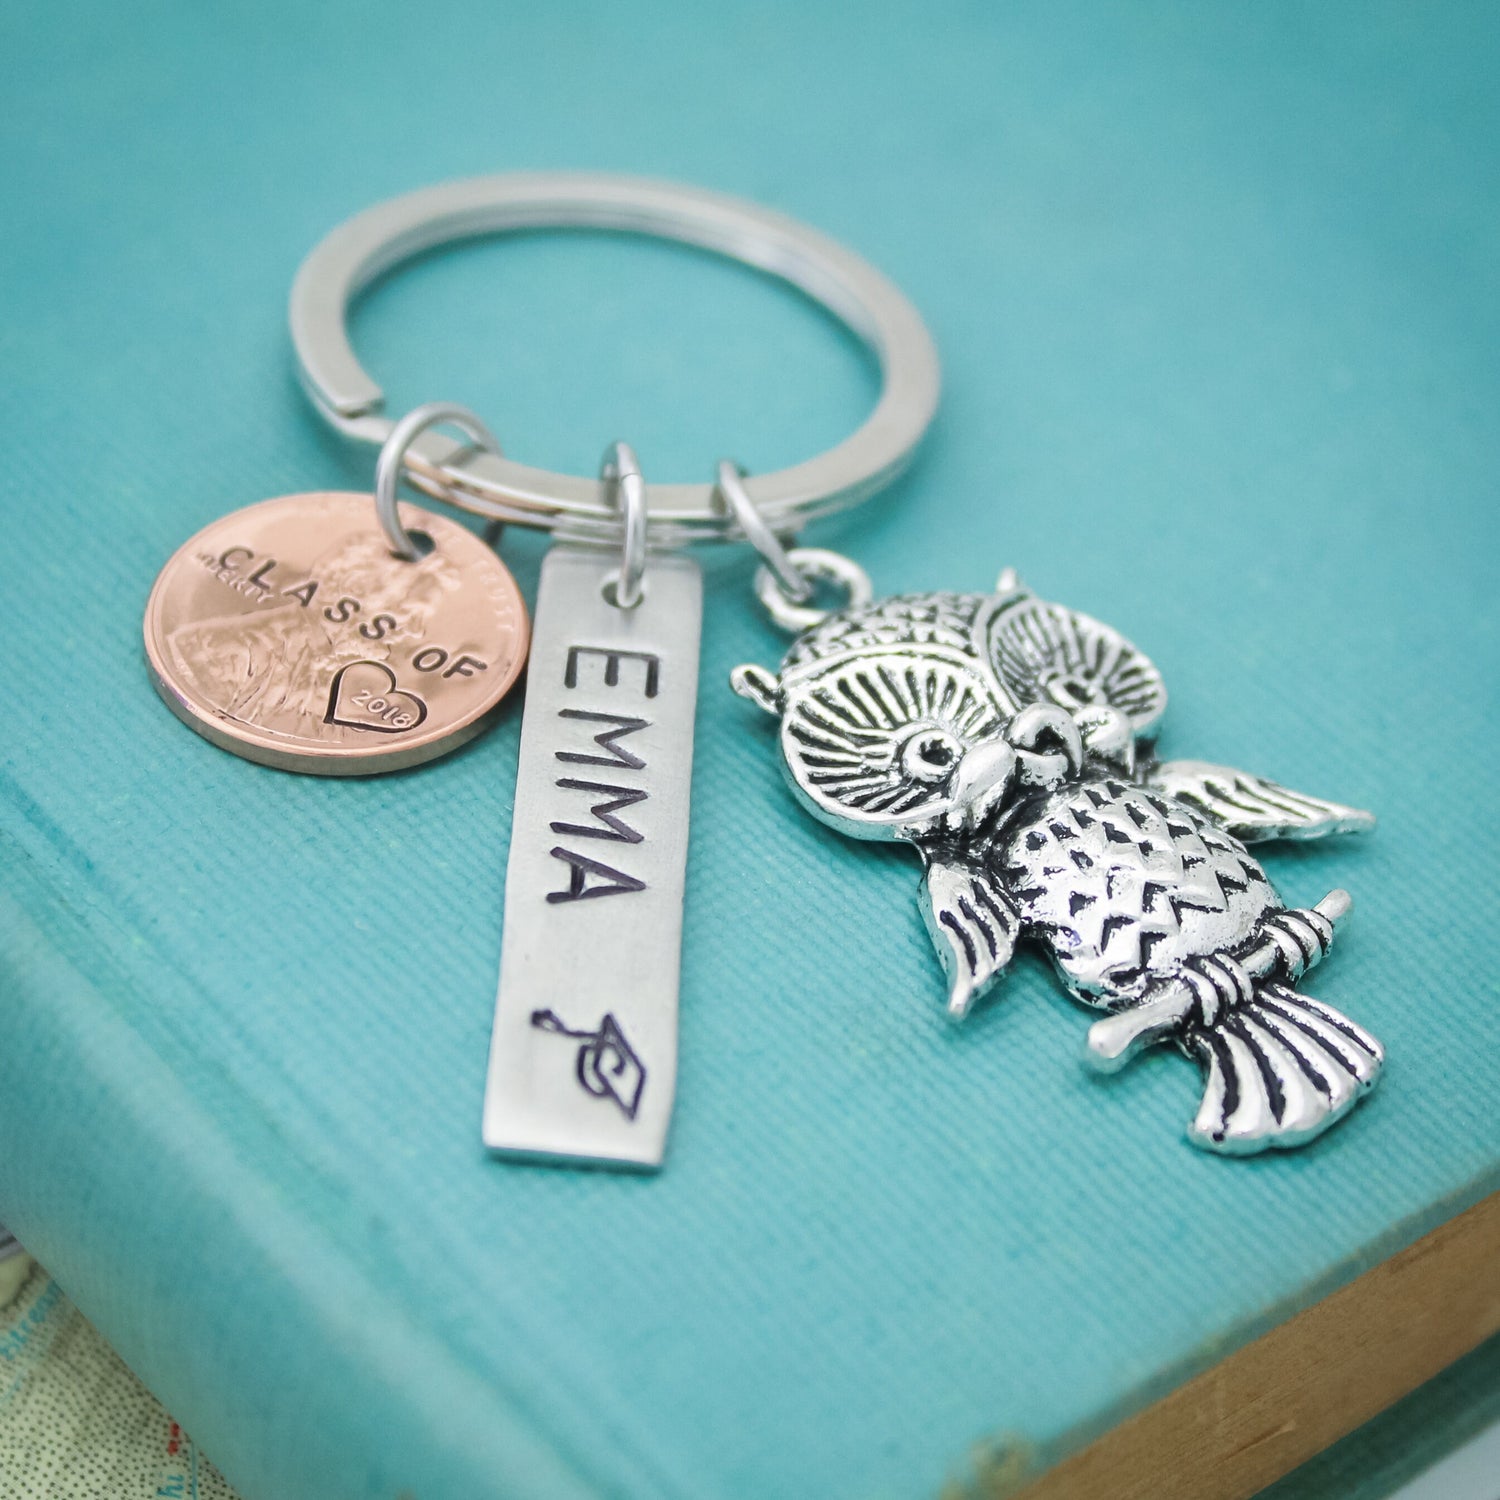 Personalized Lucky Keychain, Lucky Grad Keychain, Graduation Gifts, Lucky Penny Keychain, Graduate Gift, Compass Key Chain, Owl Tree of Life